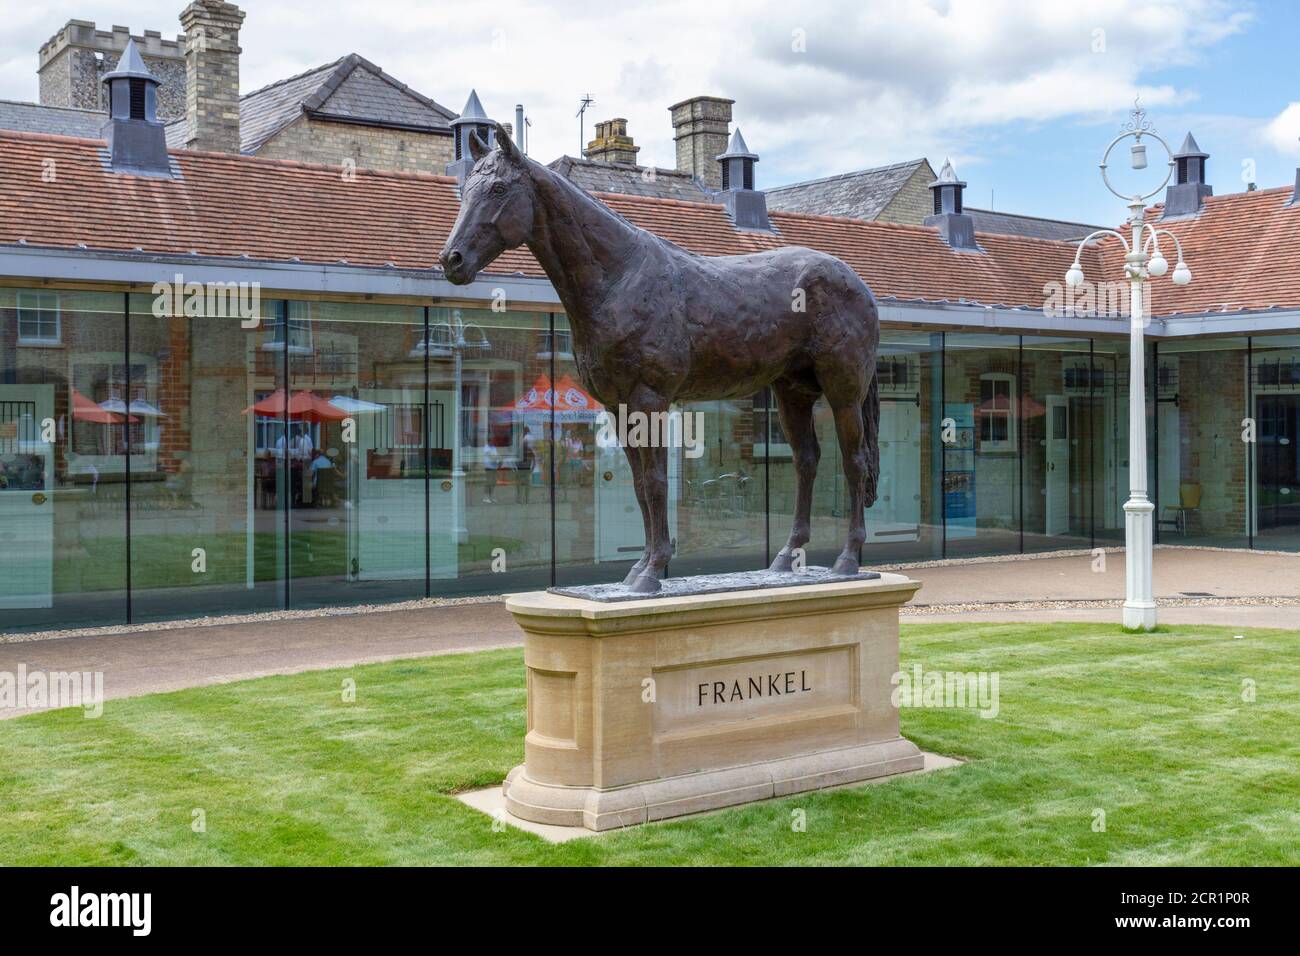 Statue of the great Frankel in the grounds of National Heritage Centre for Horseracing & Sporting Art, Palace House, Newmarket, Suffolk, UK. Stock Photo